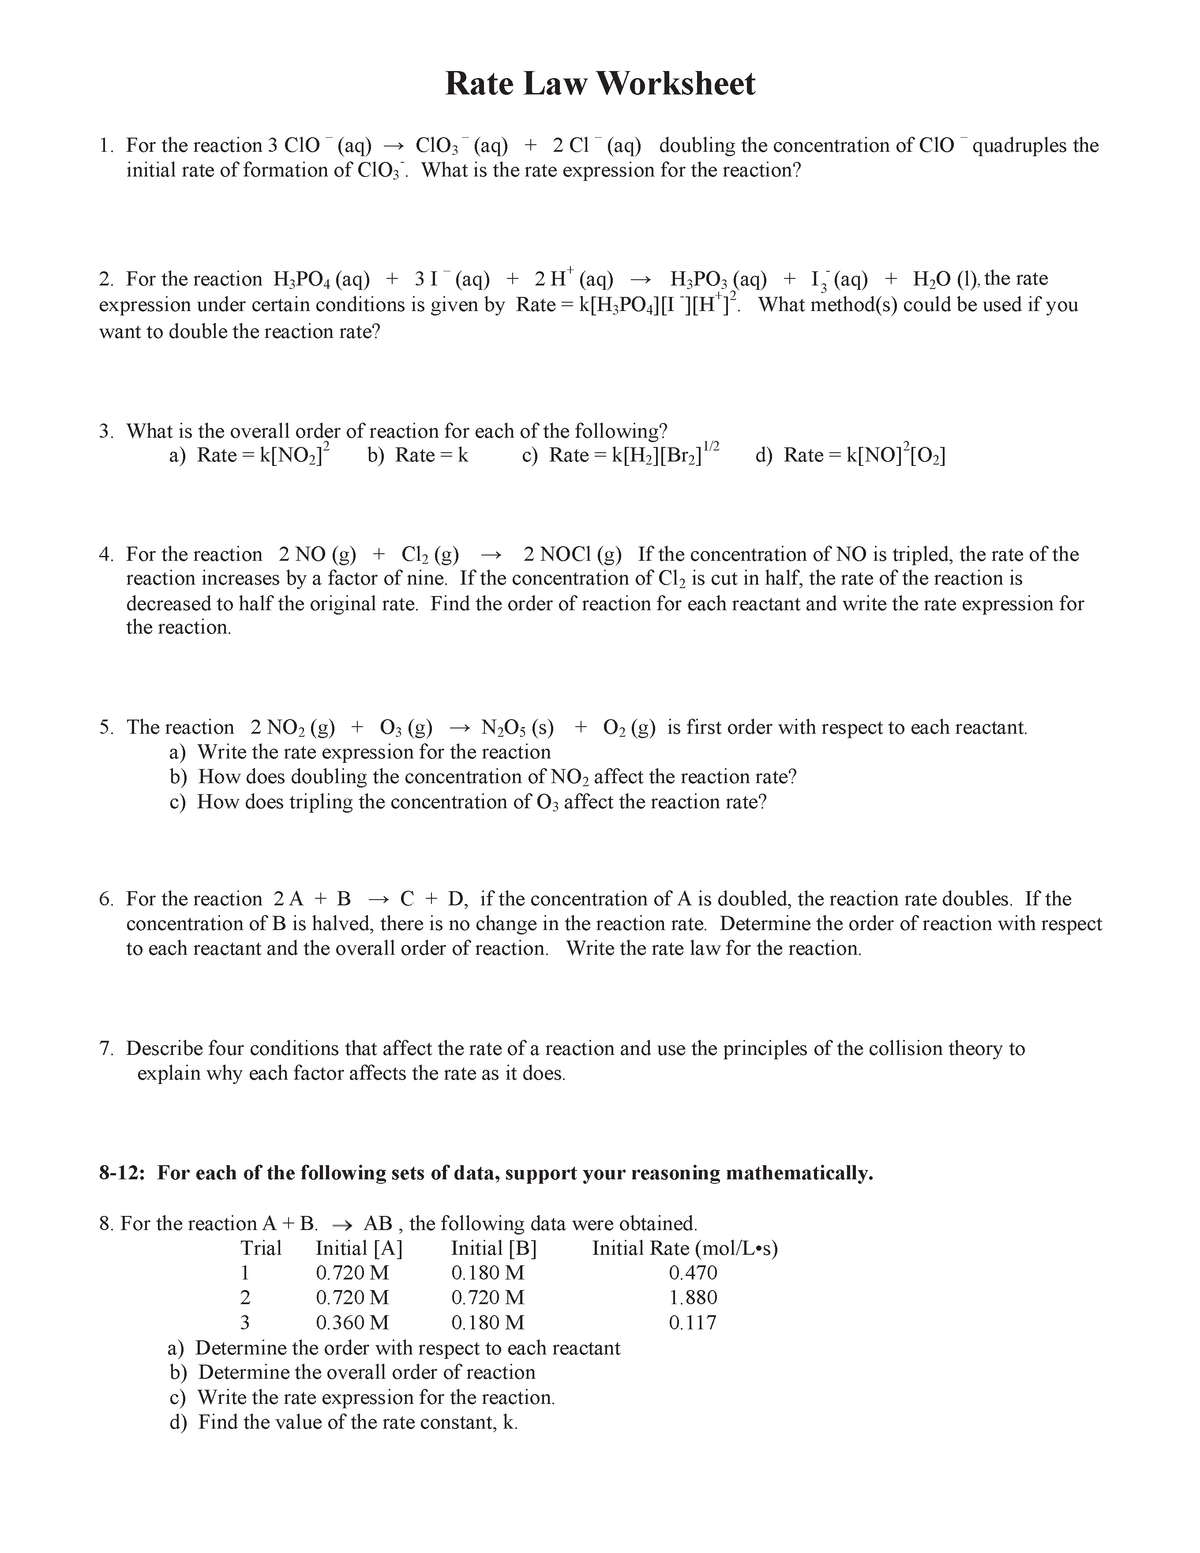 Rate Law Worksheet A series of questions based on The Rate Law that